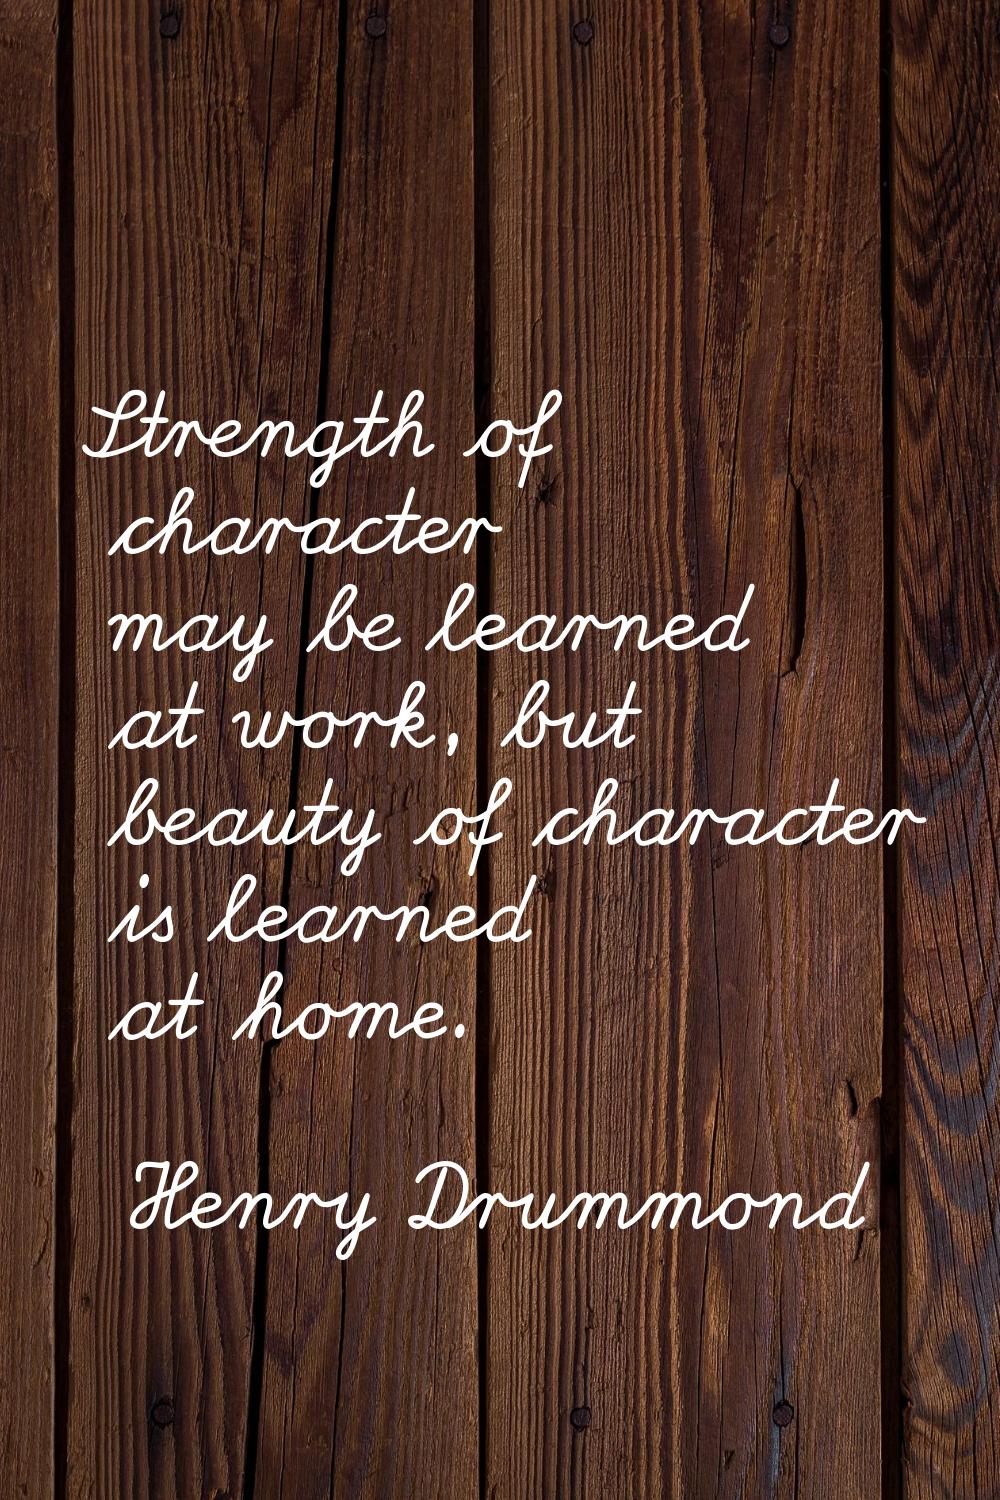 Strength of character may be learned at work, but beauty of character is learned at home.